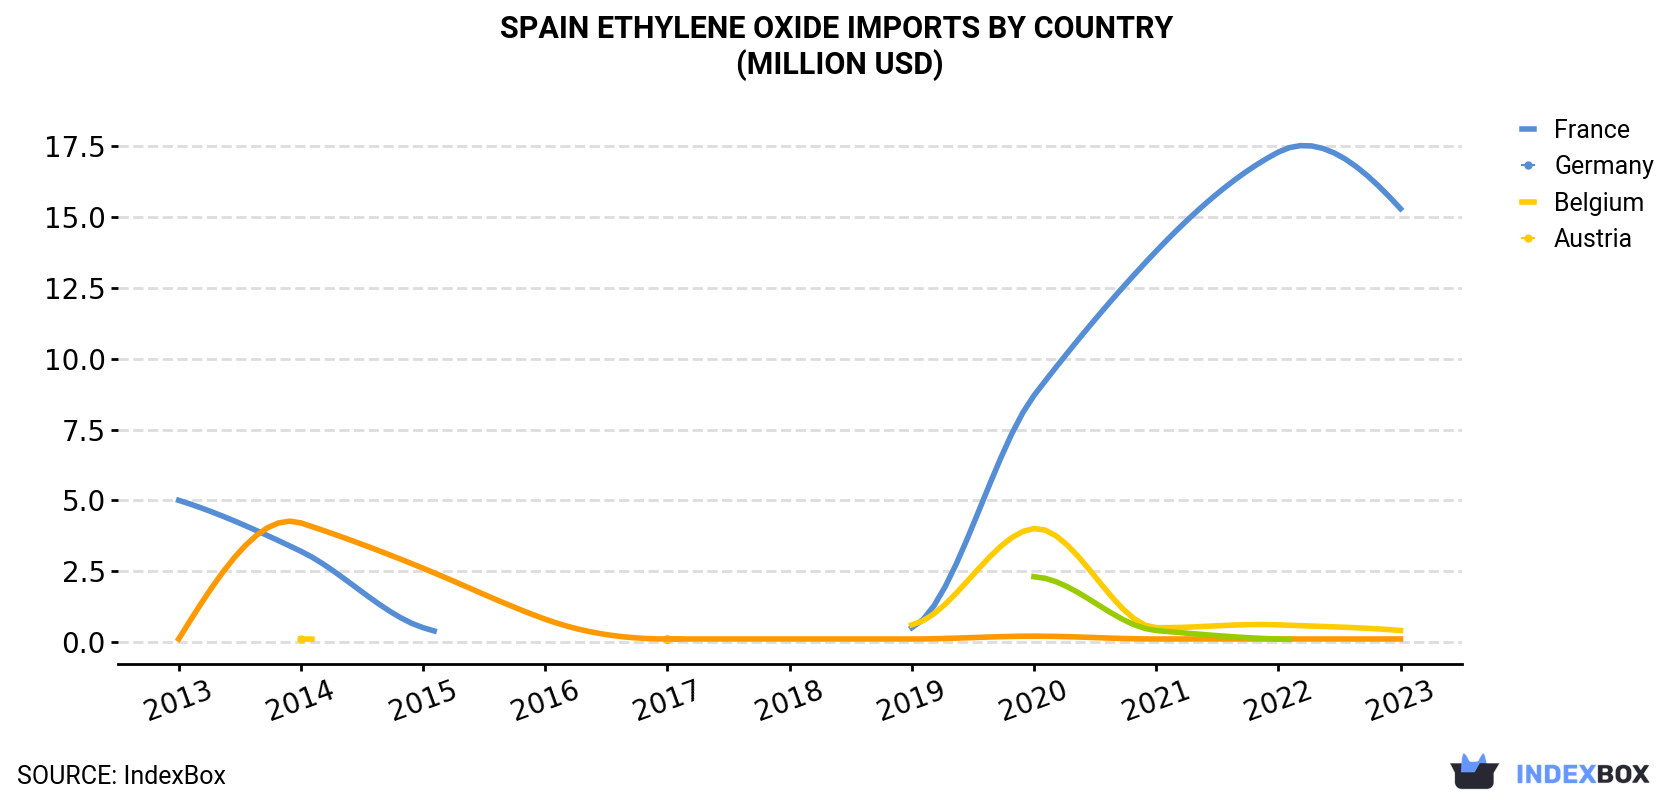 Spain Ethylene Oxide Imports By Country (Million USD)